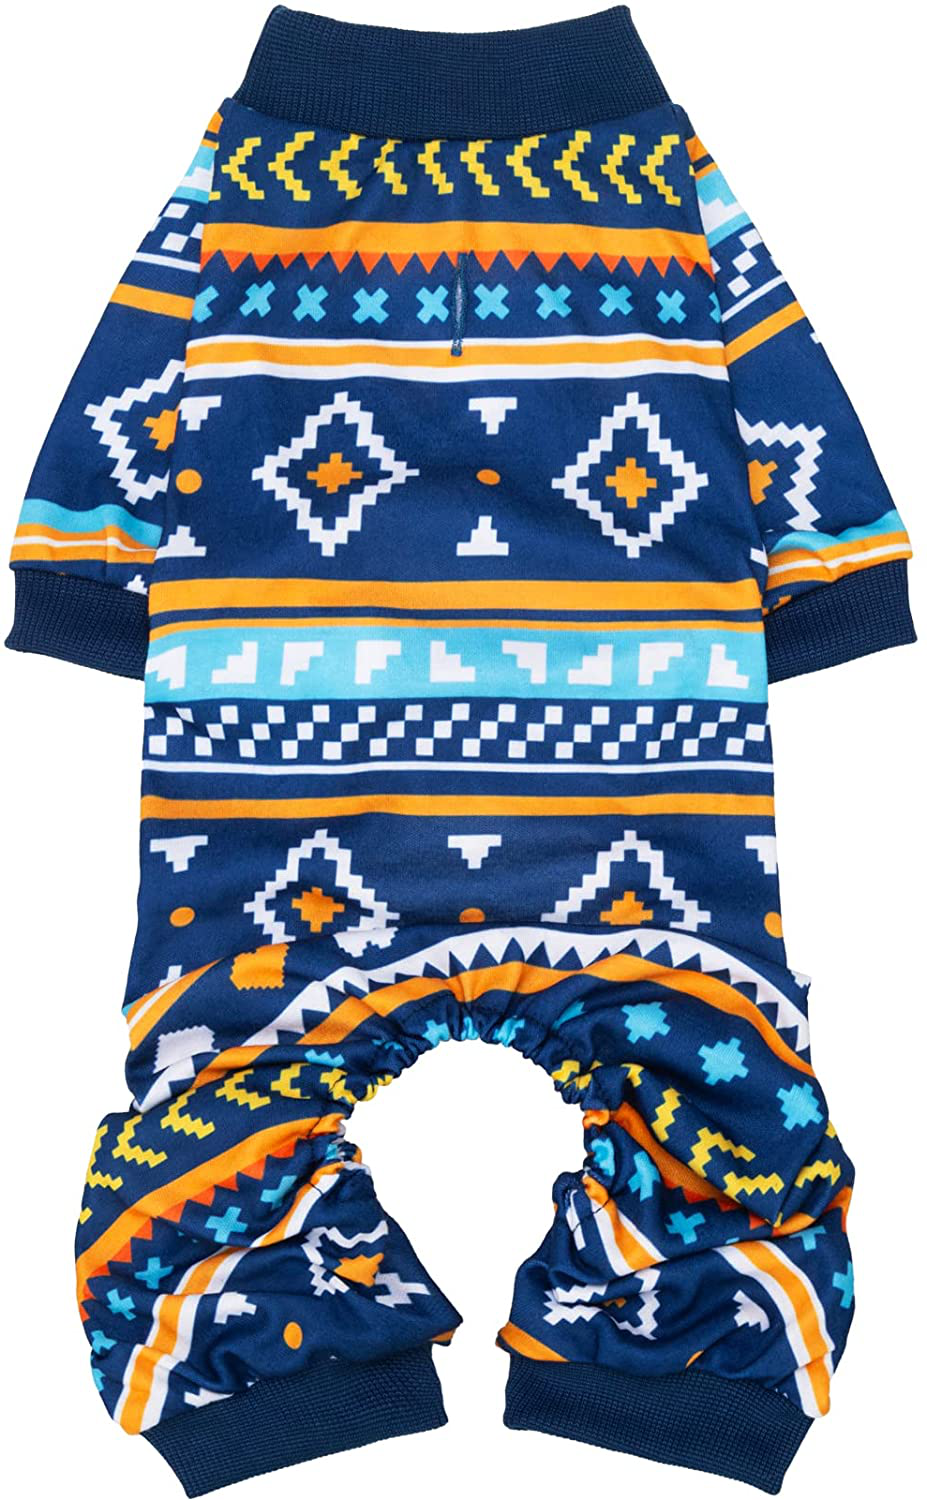 TAILGOO Light Breathable Dog Pajamas - Soft Apparel Jumpsuit, Fashionable Pet Clothes with Exquisite Geometric Patterns, Cute Puppy Pjs for Small or Kid Doggy Animals & Pet Supplies > Pet Supplies > Dog Supplies > Dog Apparel TAILGOO Blue Small 